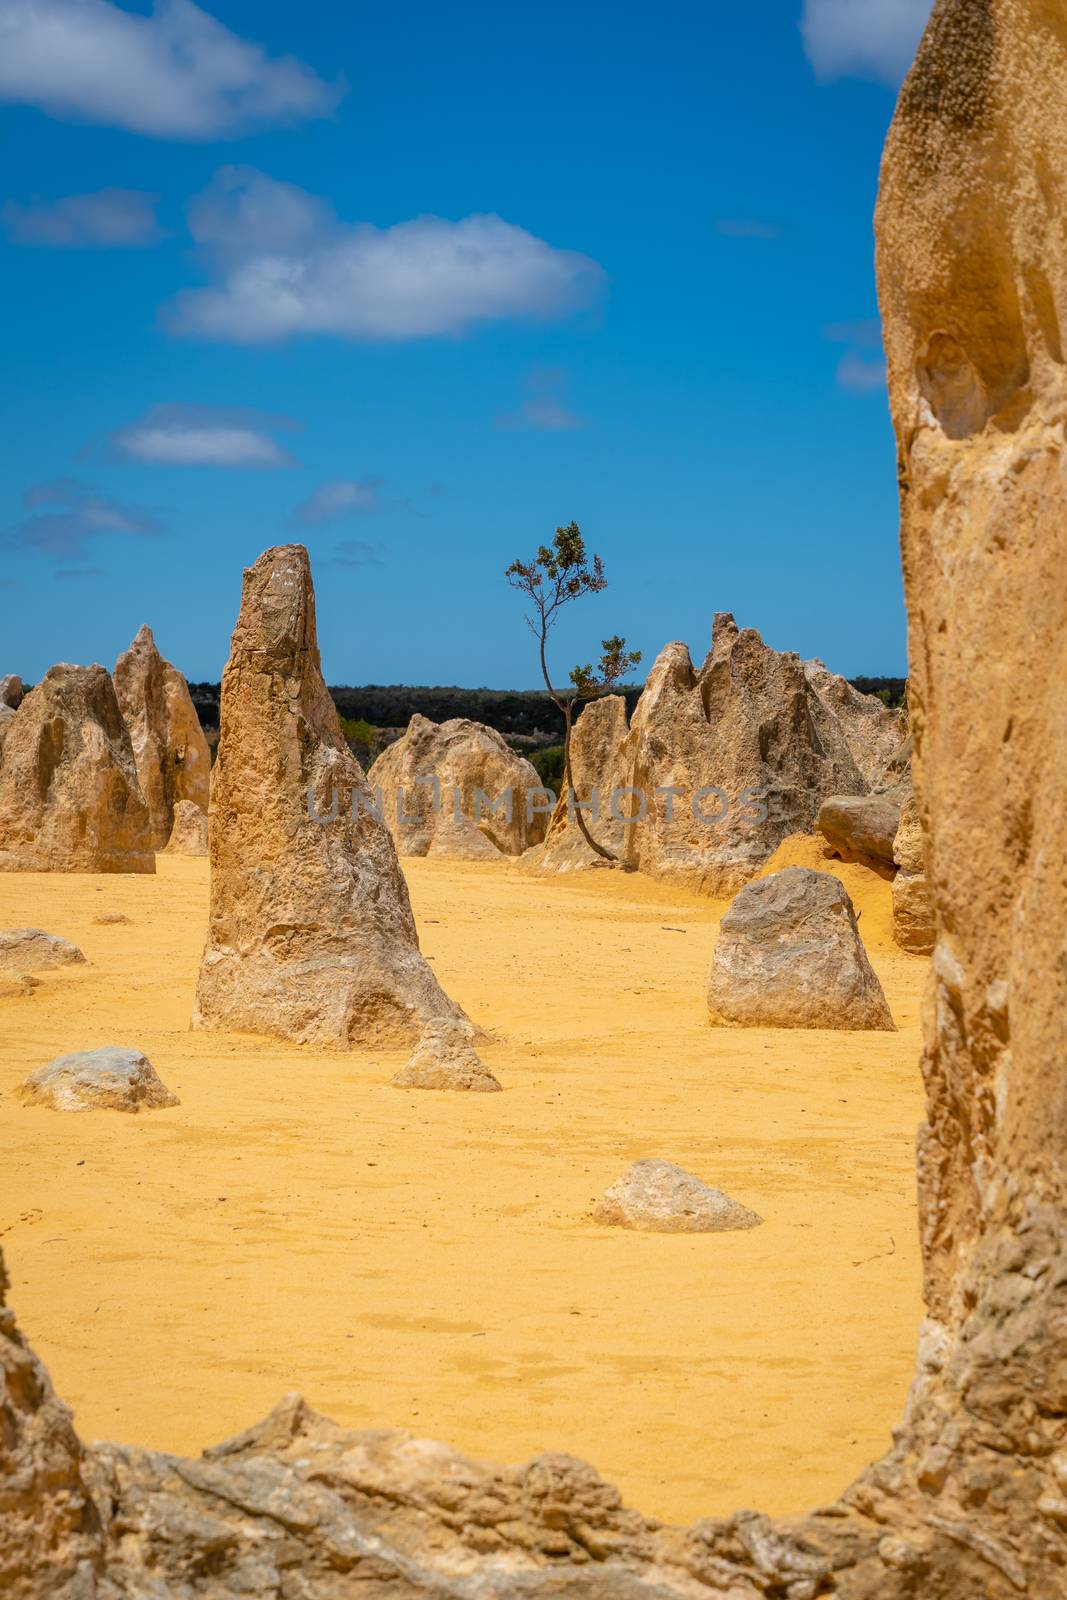 Upright standing rock formations at the Pinnacles Desert in Western Australia by MXW_Stock